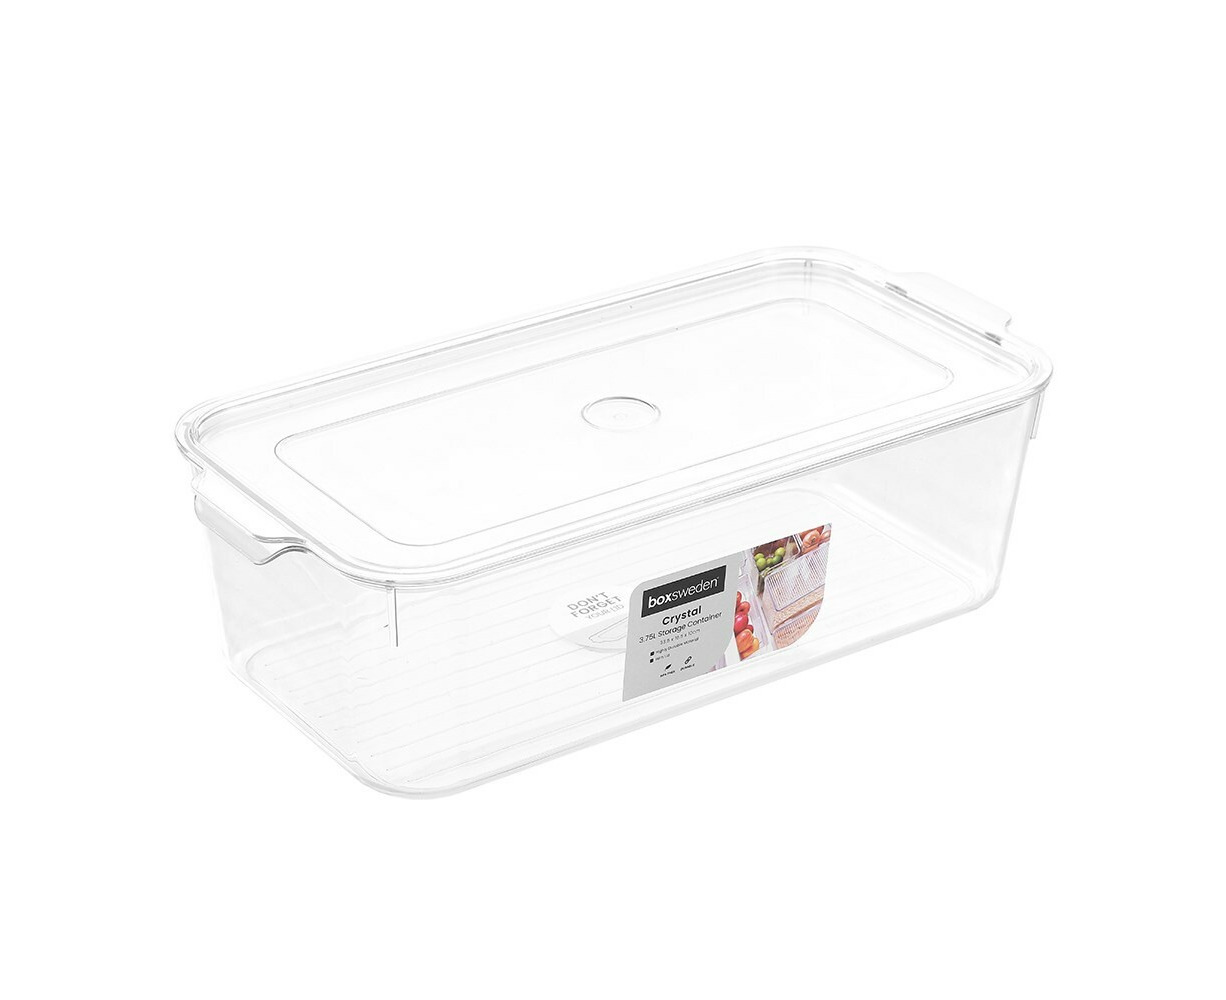 Boxsweden Crystal 4l/21cm Pantry Storage Container - Clear